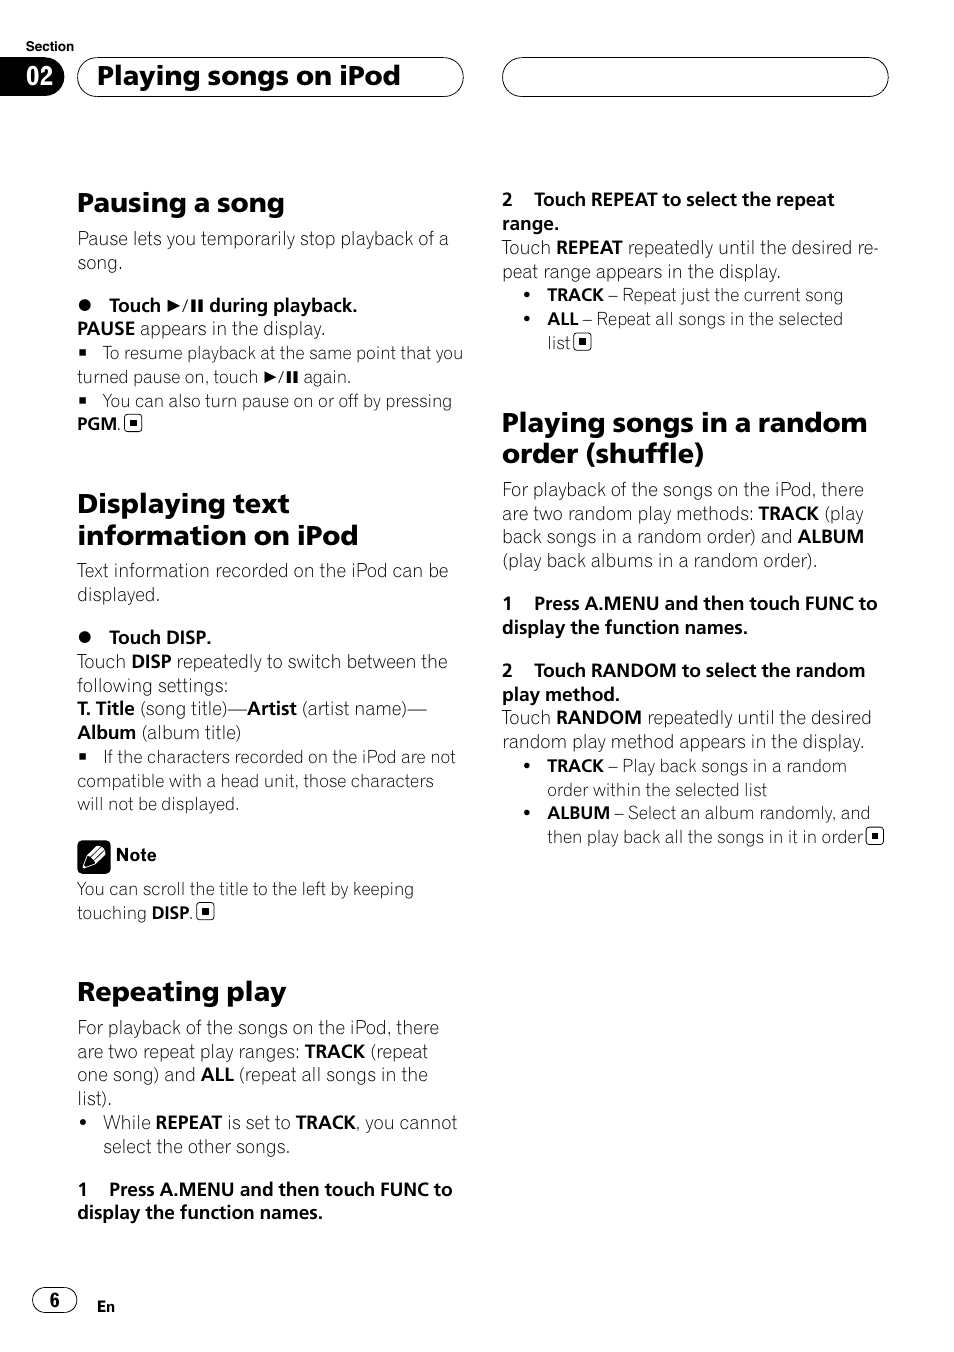 Pausing a song, Displaying text information on ipod, Repeating play | Playing songs in a random order (shuffle), Playing songs on ipod | Pioneer CD-IB100II User Manual | Page 6 / 84